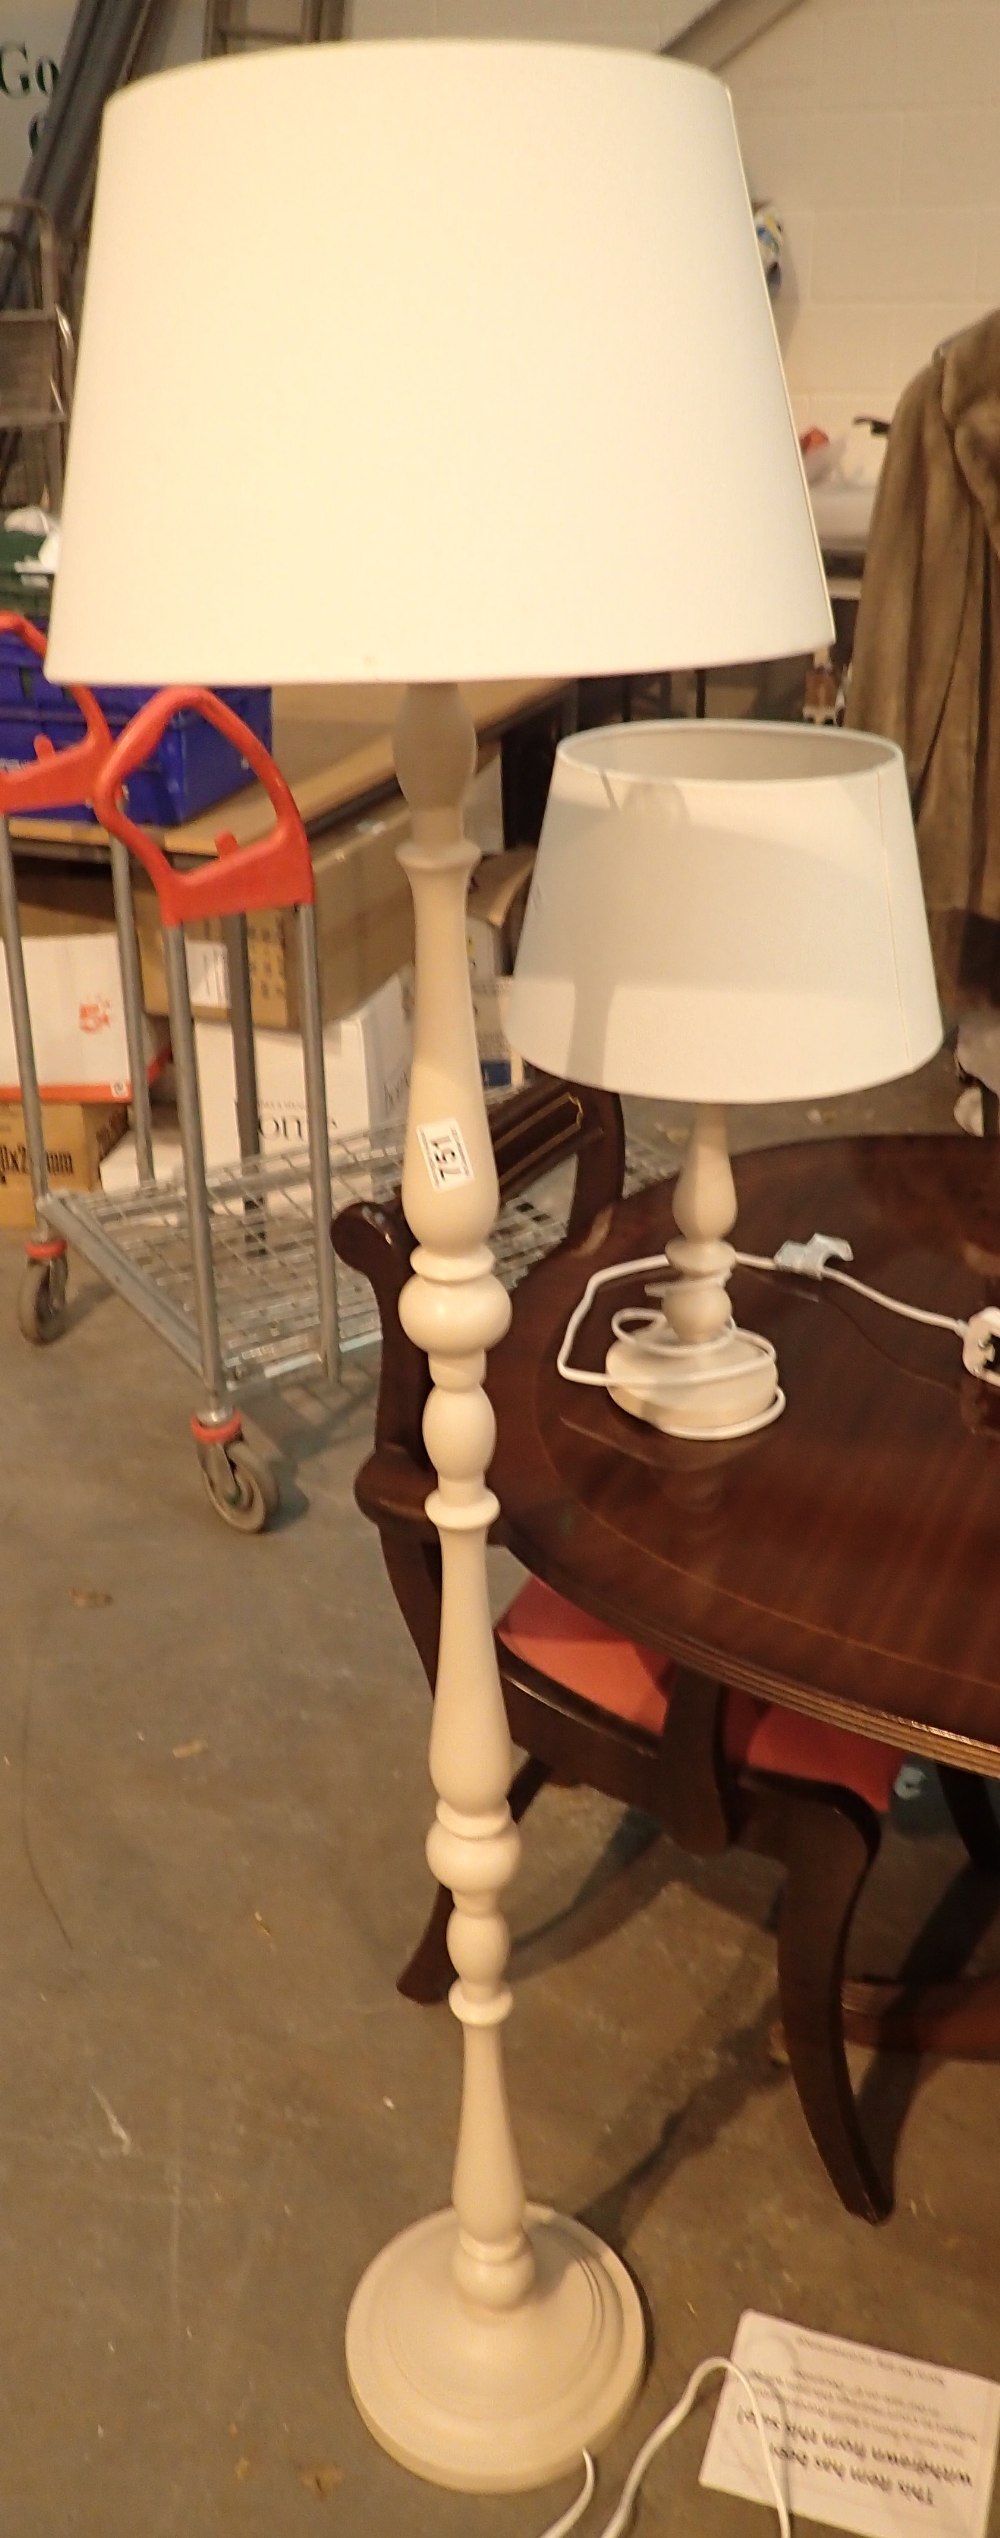 Standard lamp and shade with matching table lamp